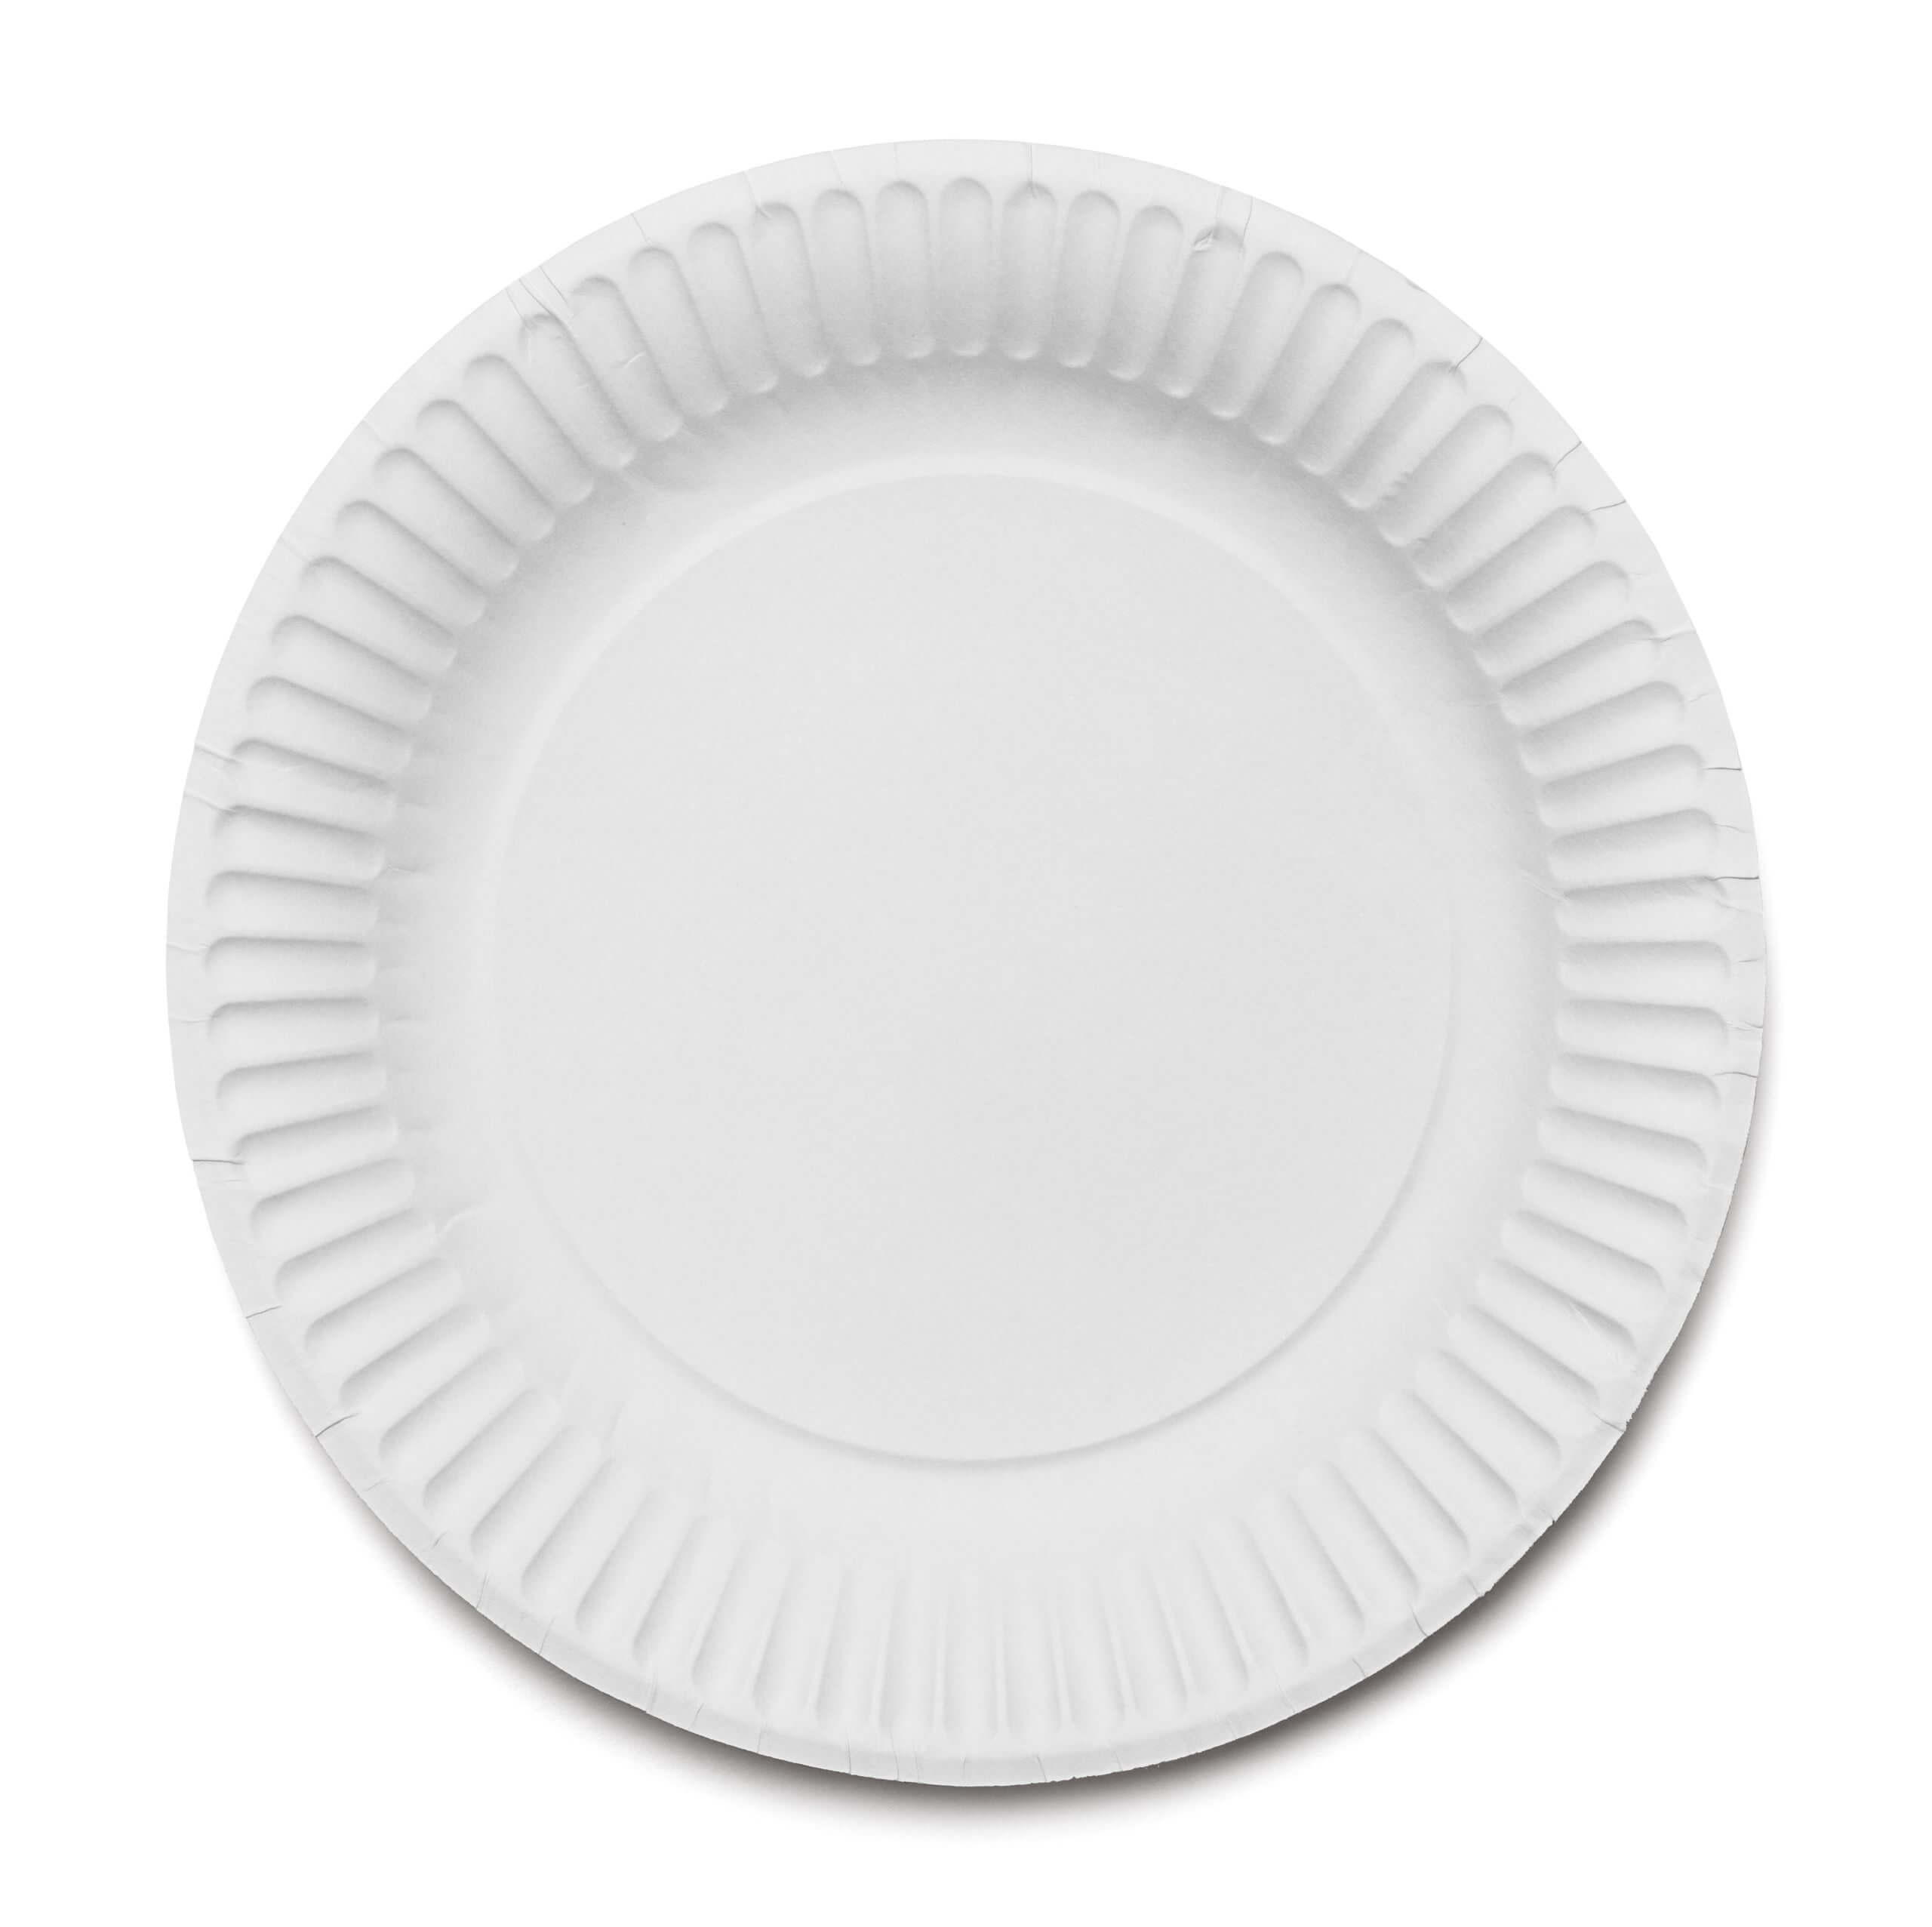 An image of one of our Paper Picnic Plates.